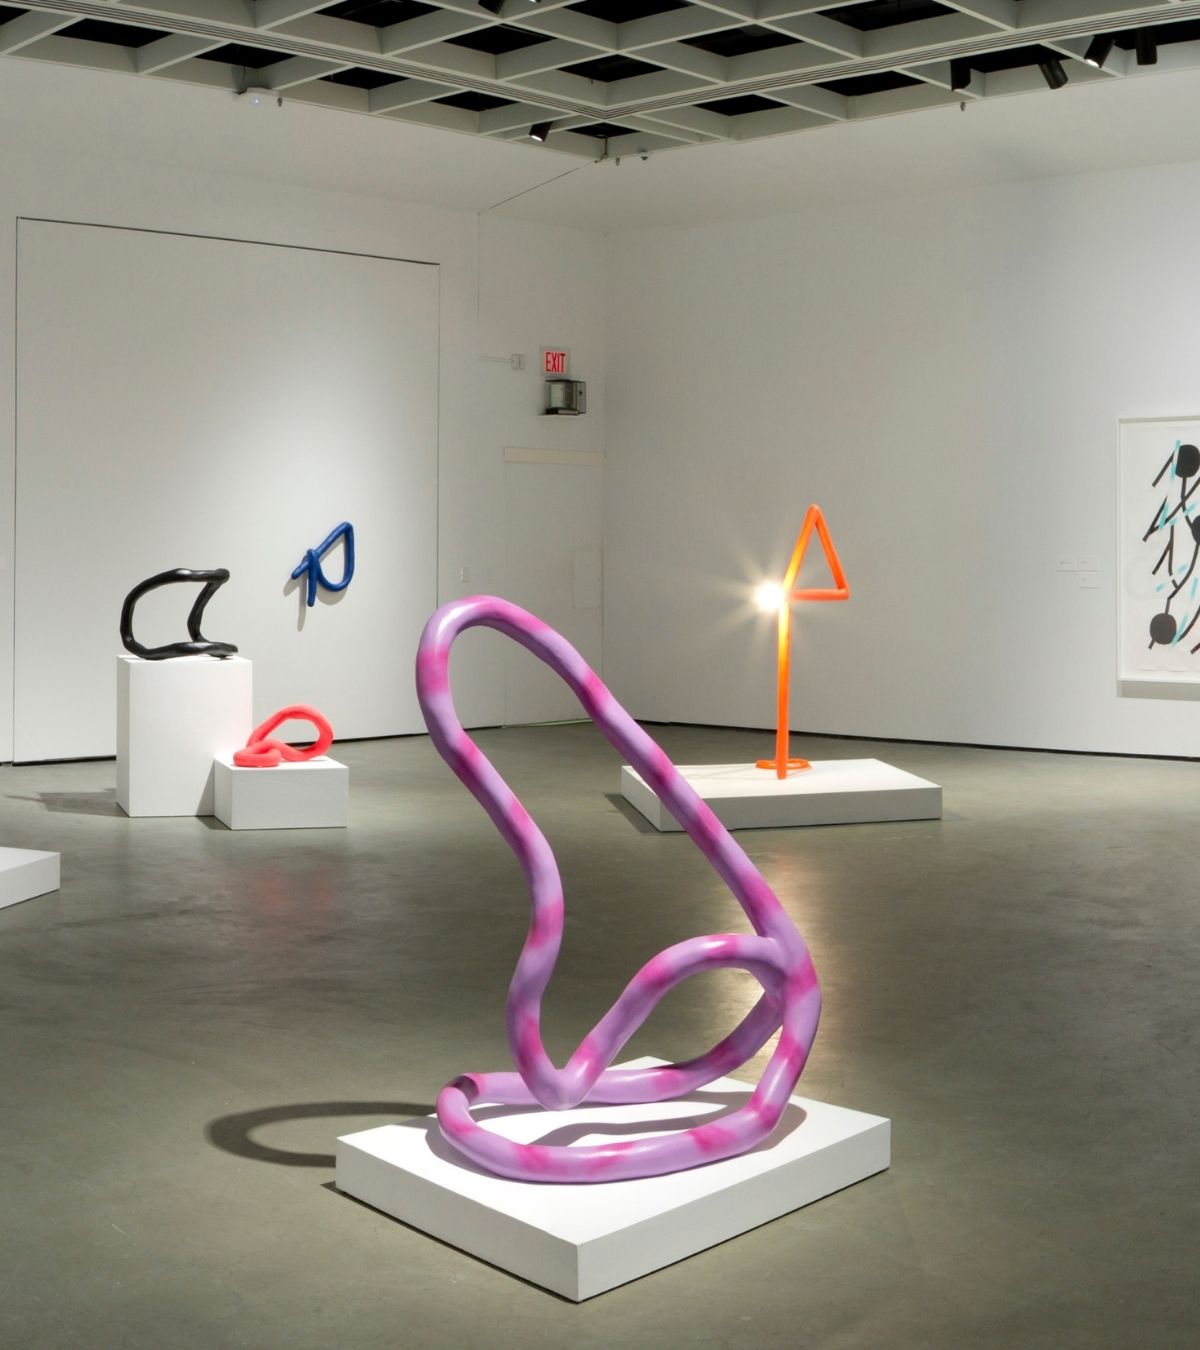 Jaime Angelopoulos installation view